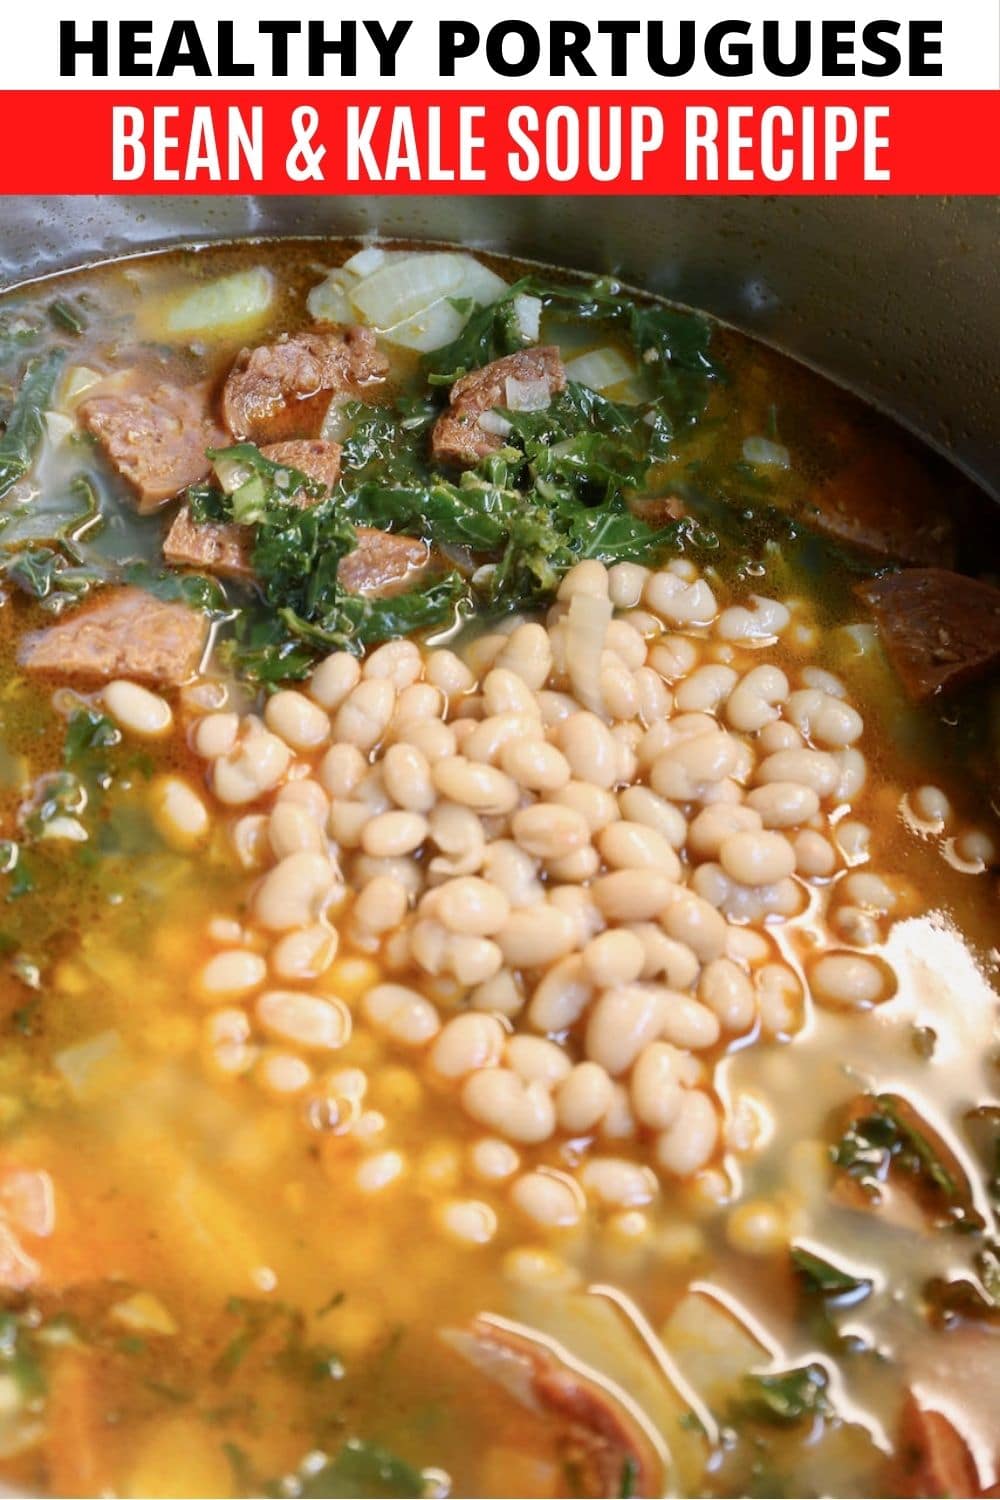 Portuguese Bean Soup Recipe with Kale and Sausage - dobbernationLOVES